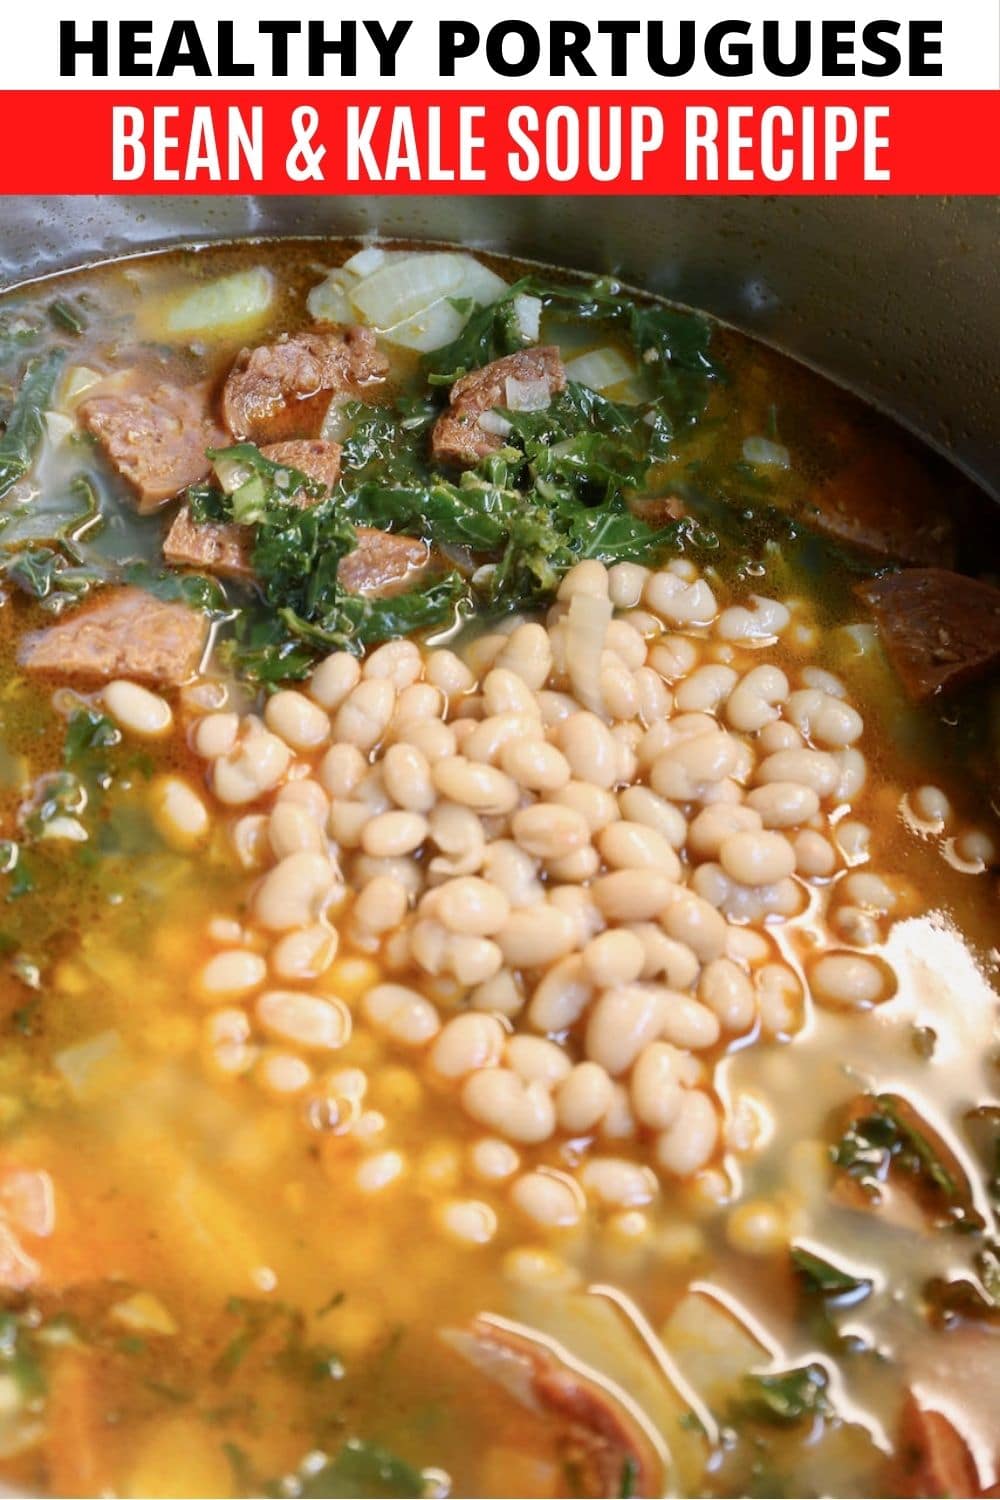 Portuguese Bean Soup Recipe with Kale and Sausage - dobbernationLOVES